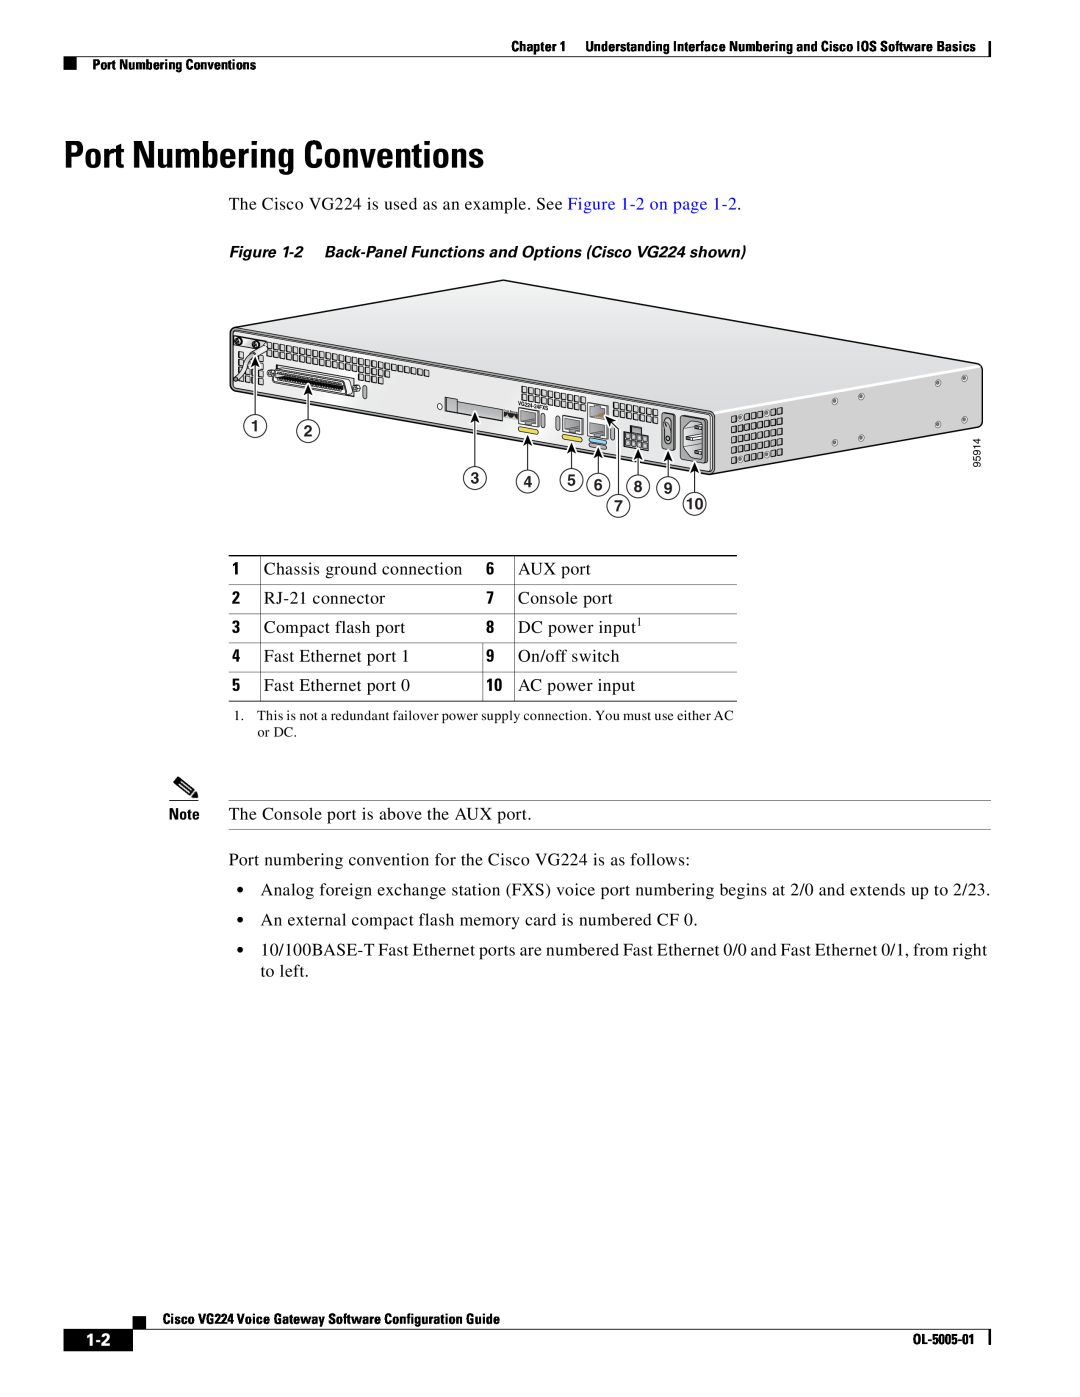 Cisco Systems manual Port Numbering Conventions, 2 Back-Panel Functions and Options Cisco VG224 shown 